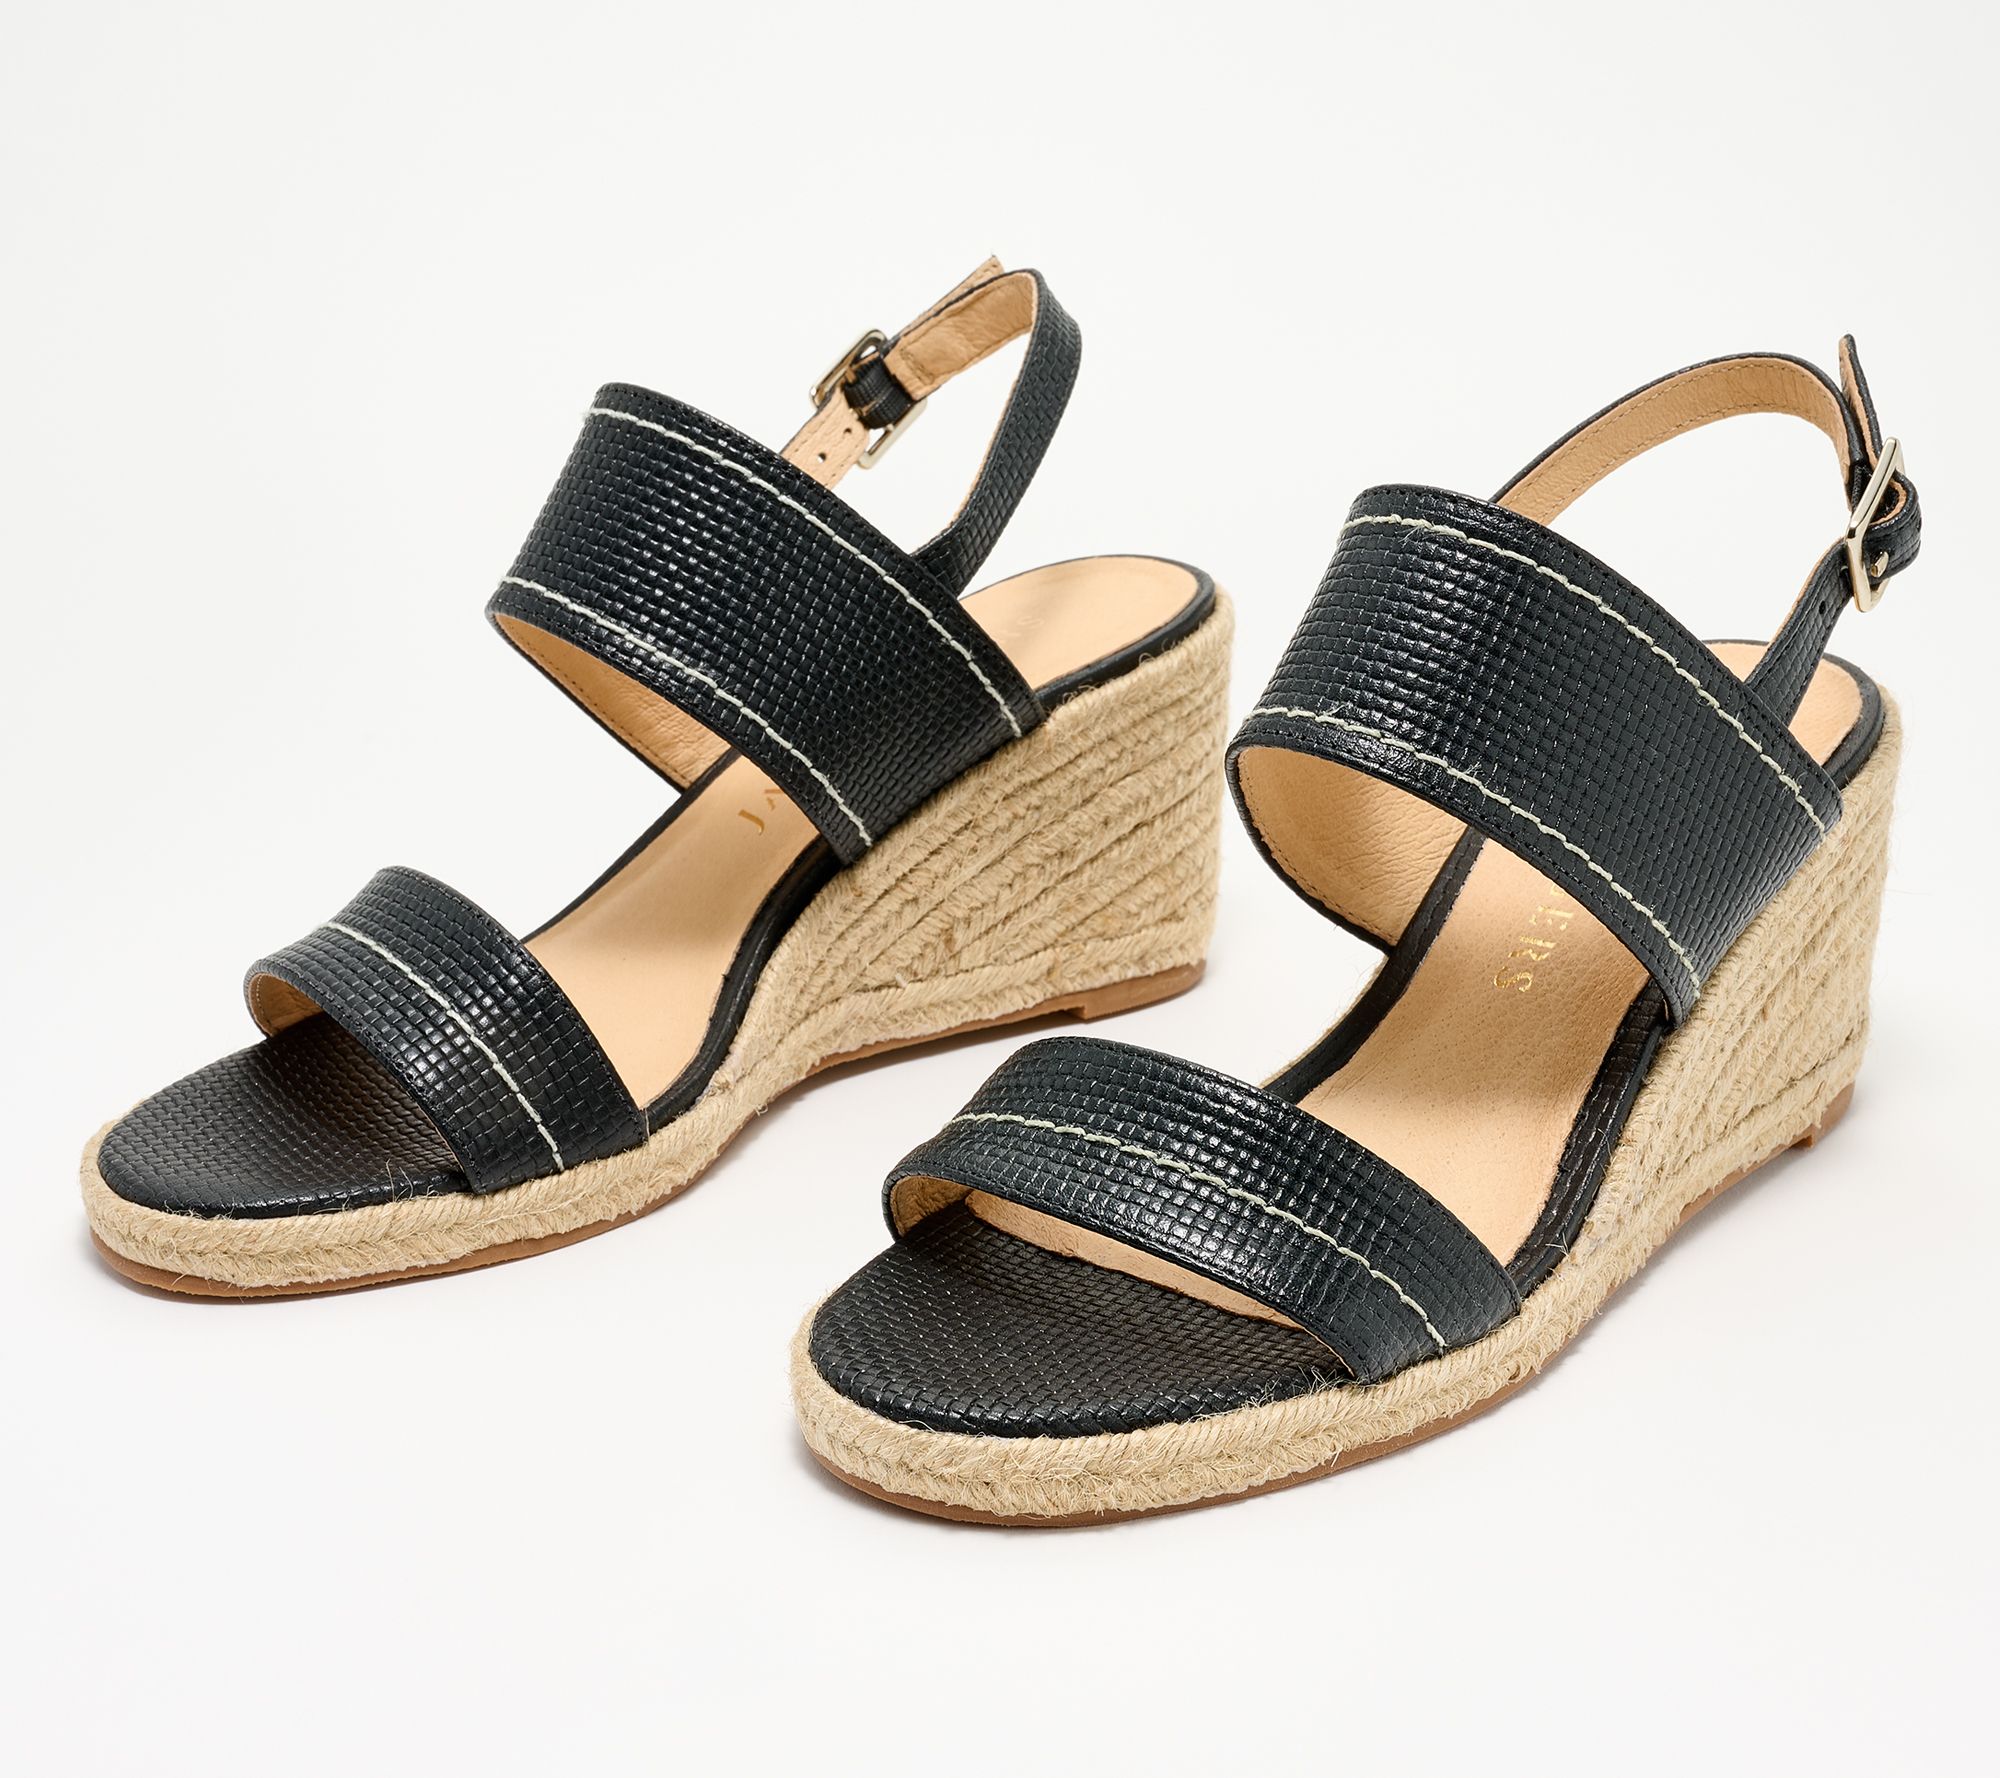 SOUL Naturalizer Wedged Sandals - Goodtimes-M 